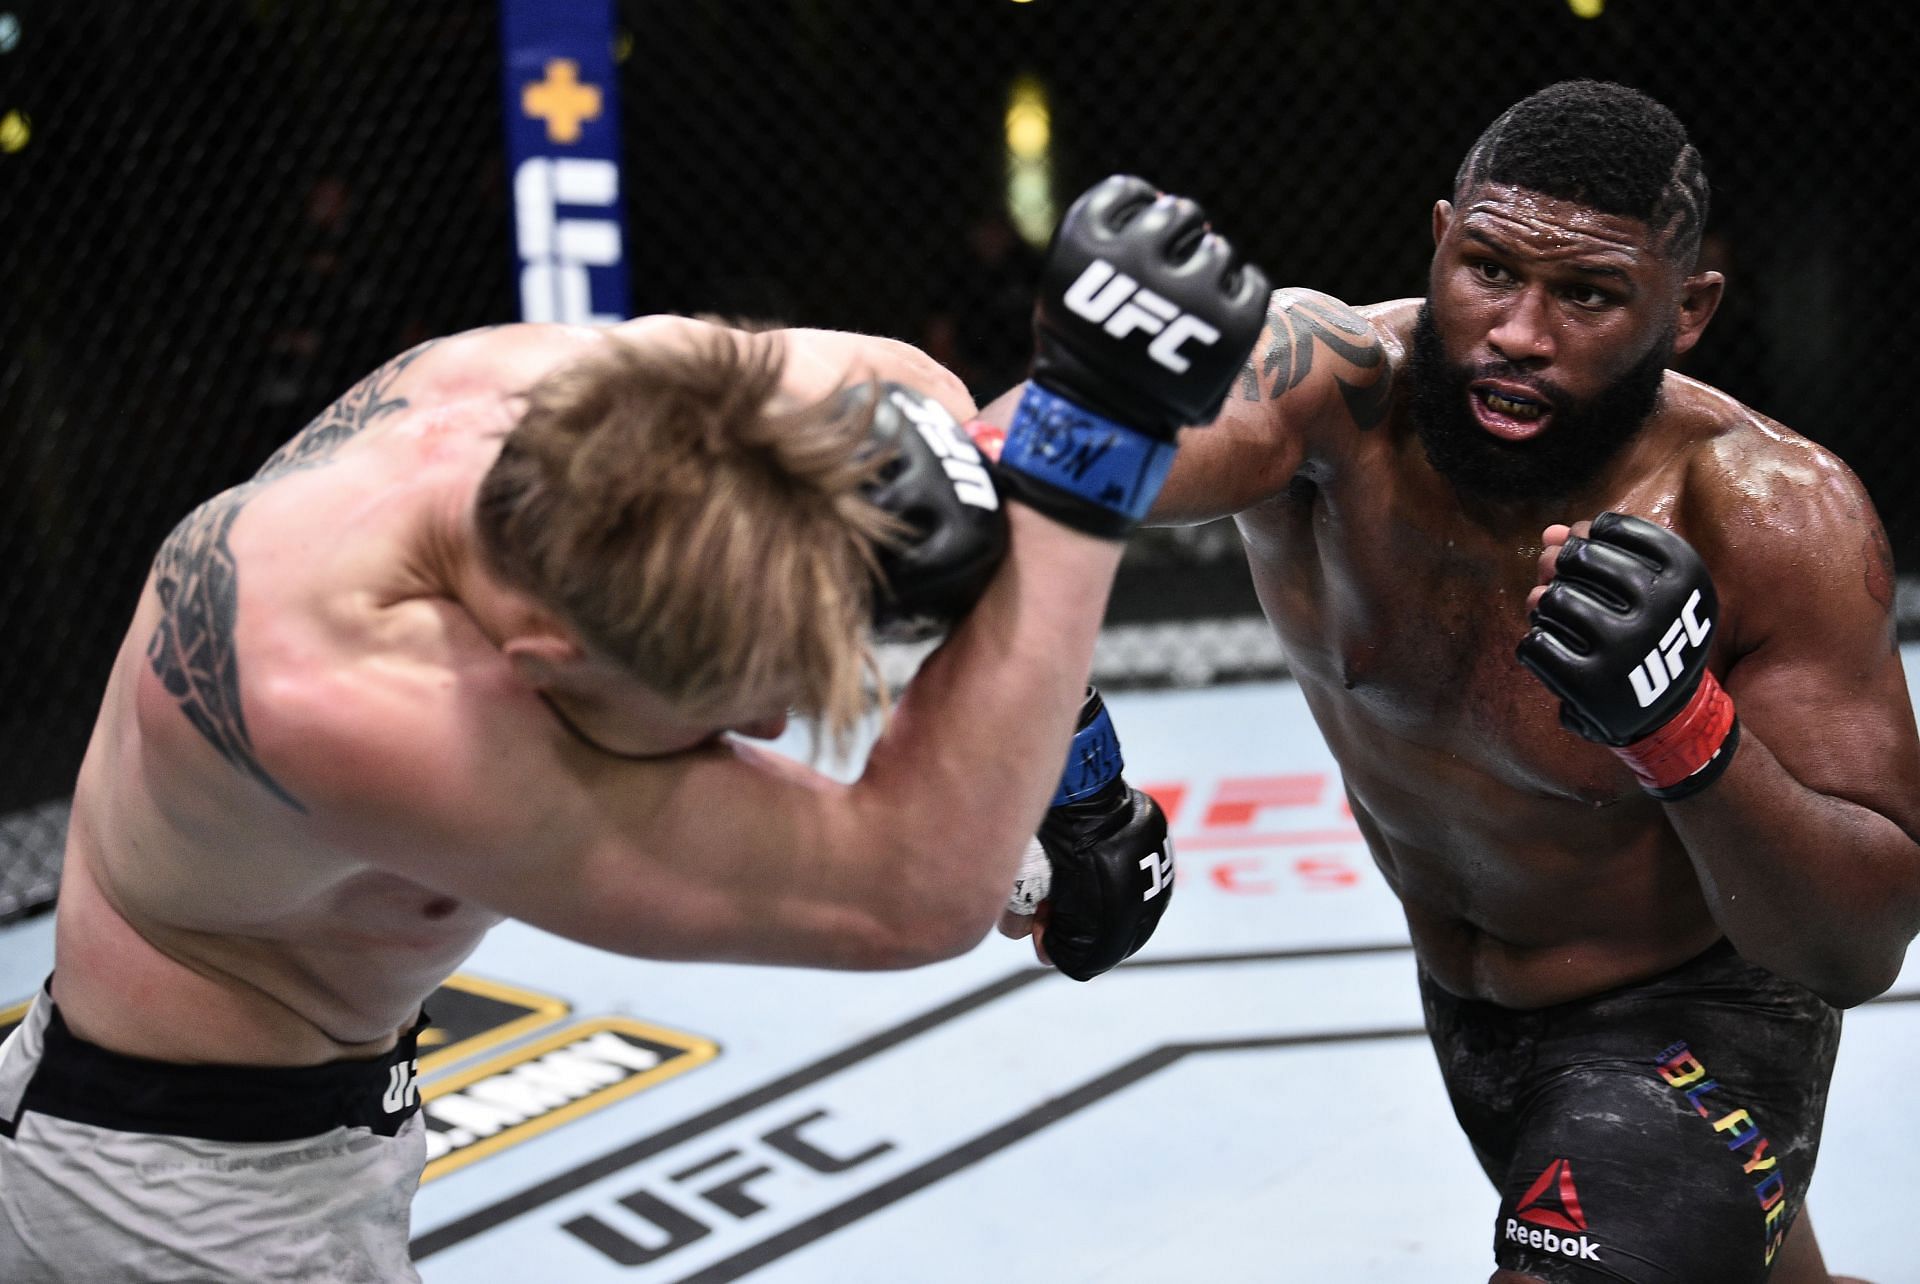 Curtis Blaydes is probably the best heavyweight wrestler in the UFC right now